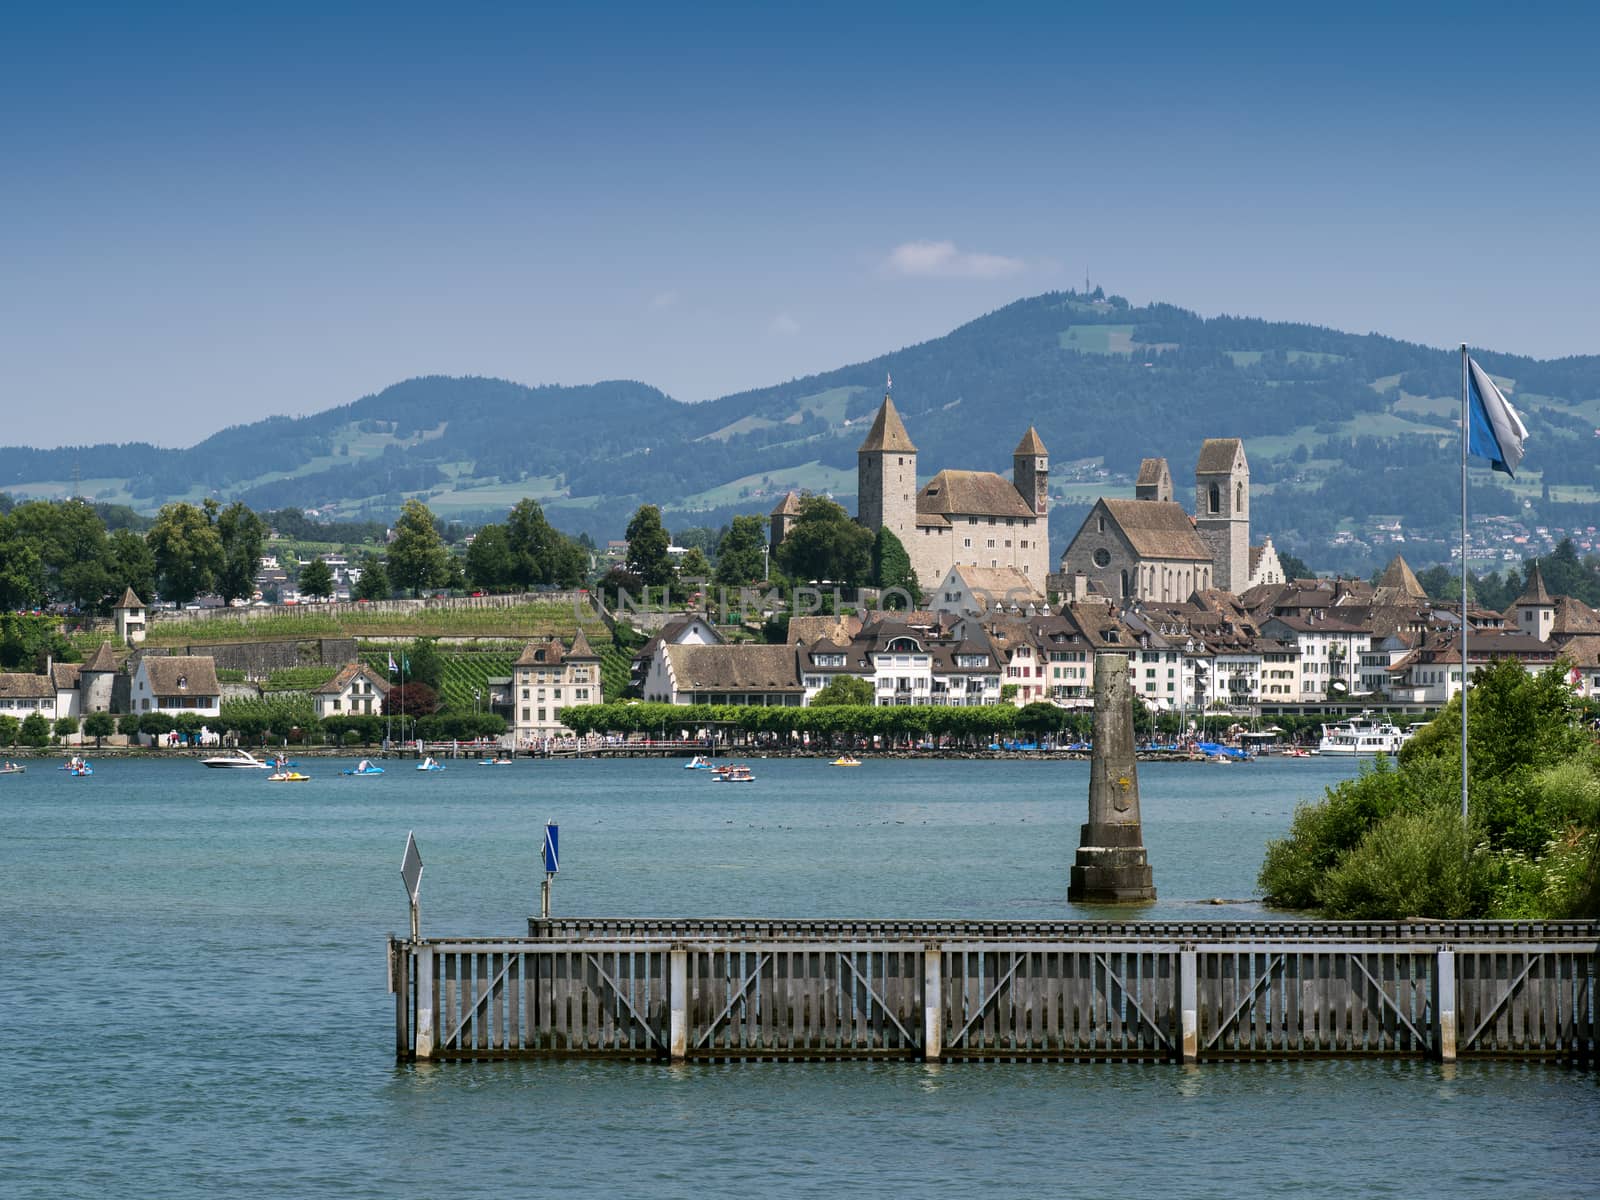 City of Rapperswil in Switzerland by sumners